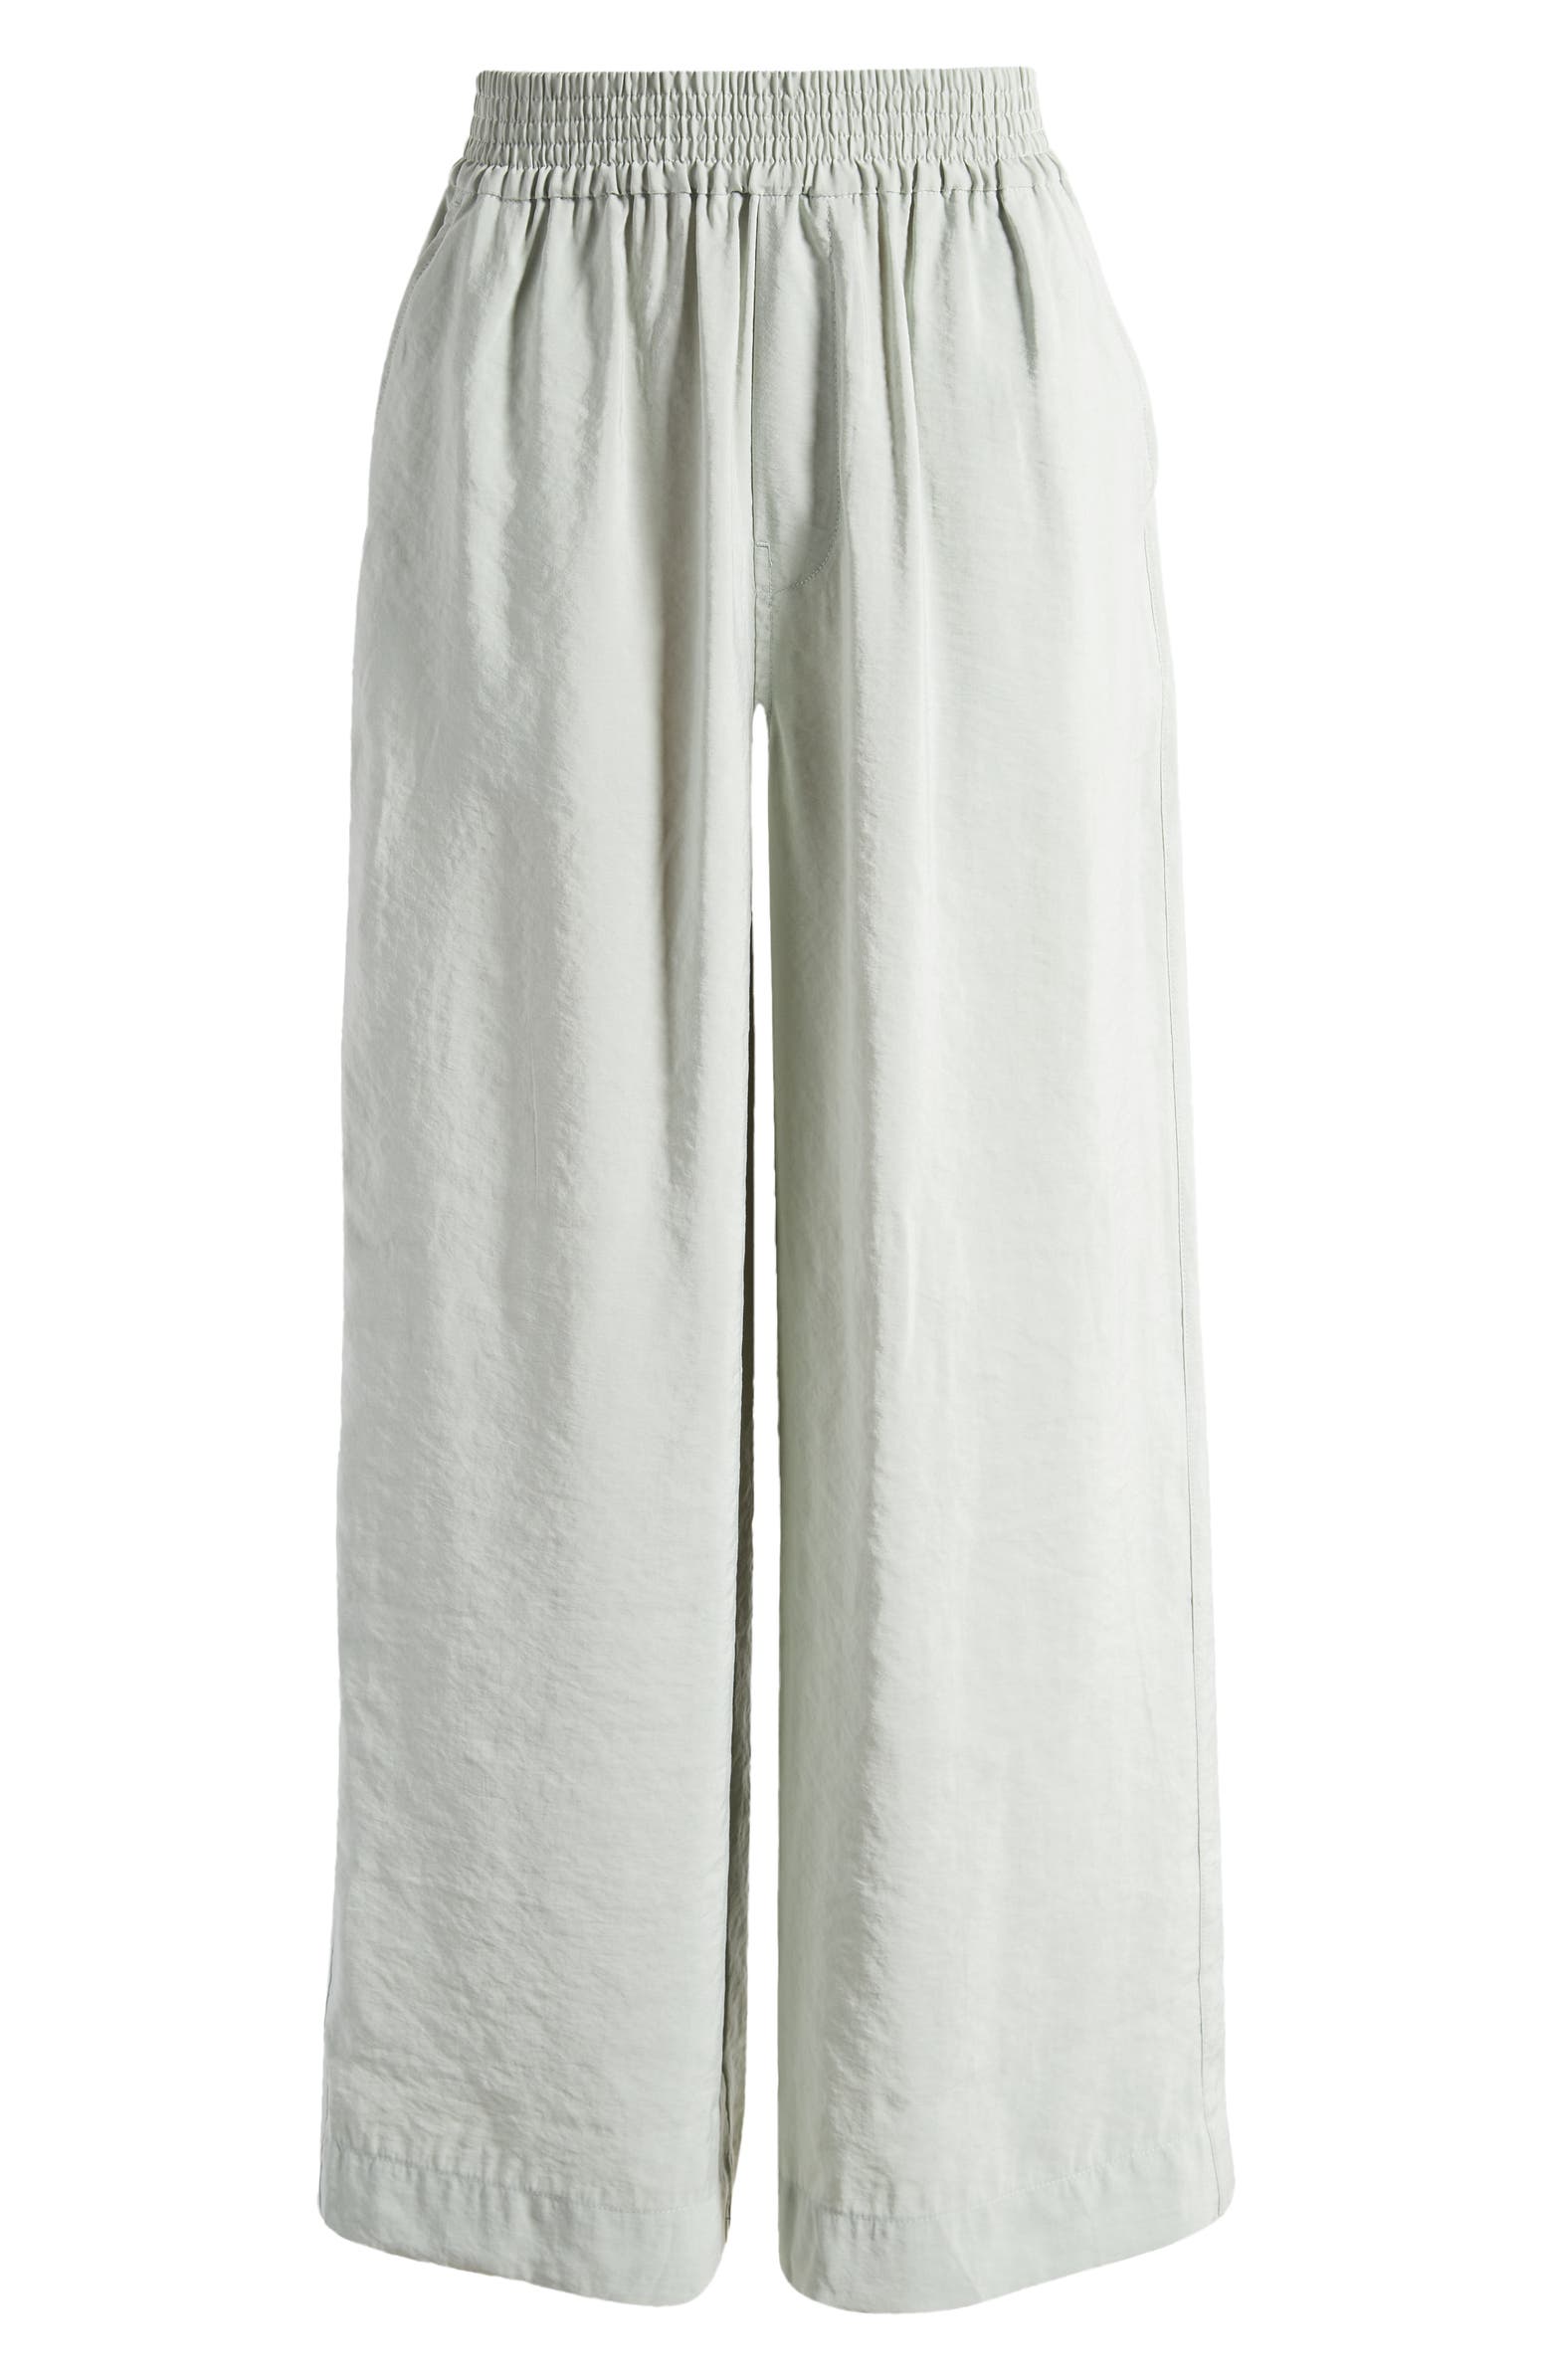 Madewell The Carley Wide Leg Pants | Nordstrom